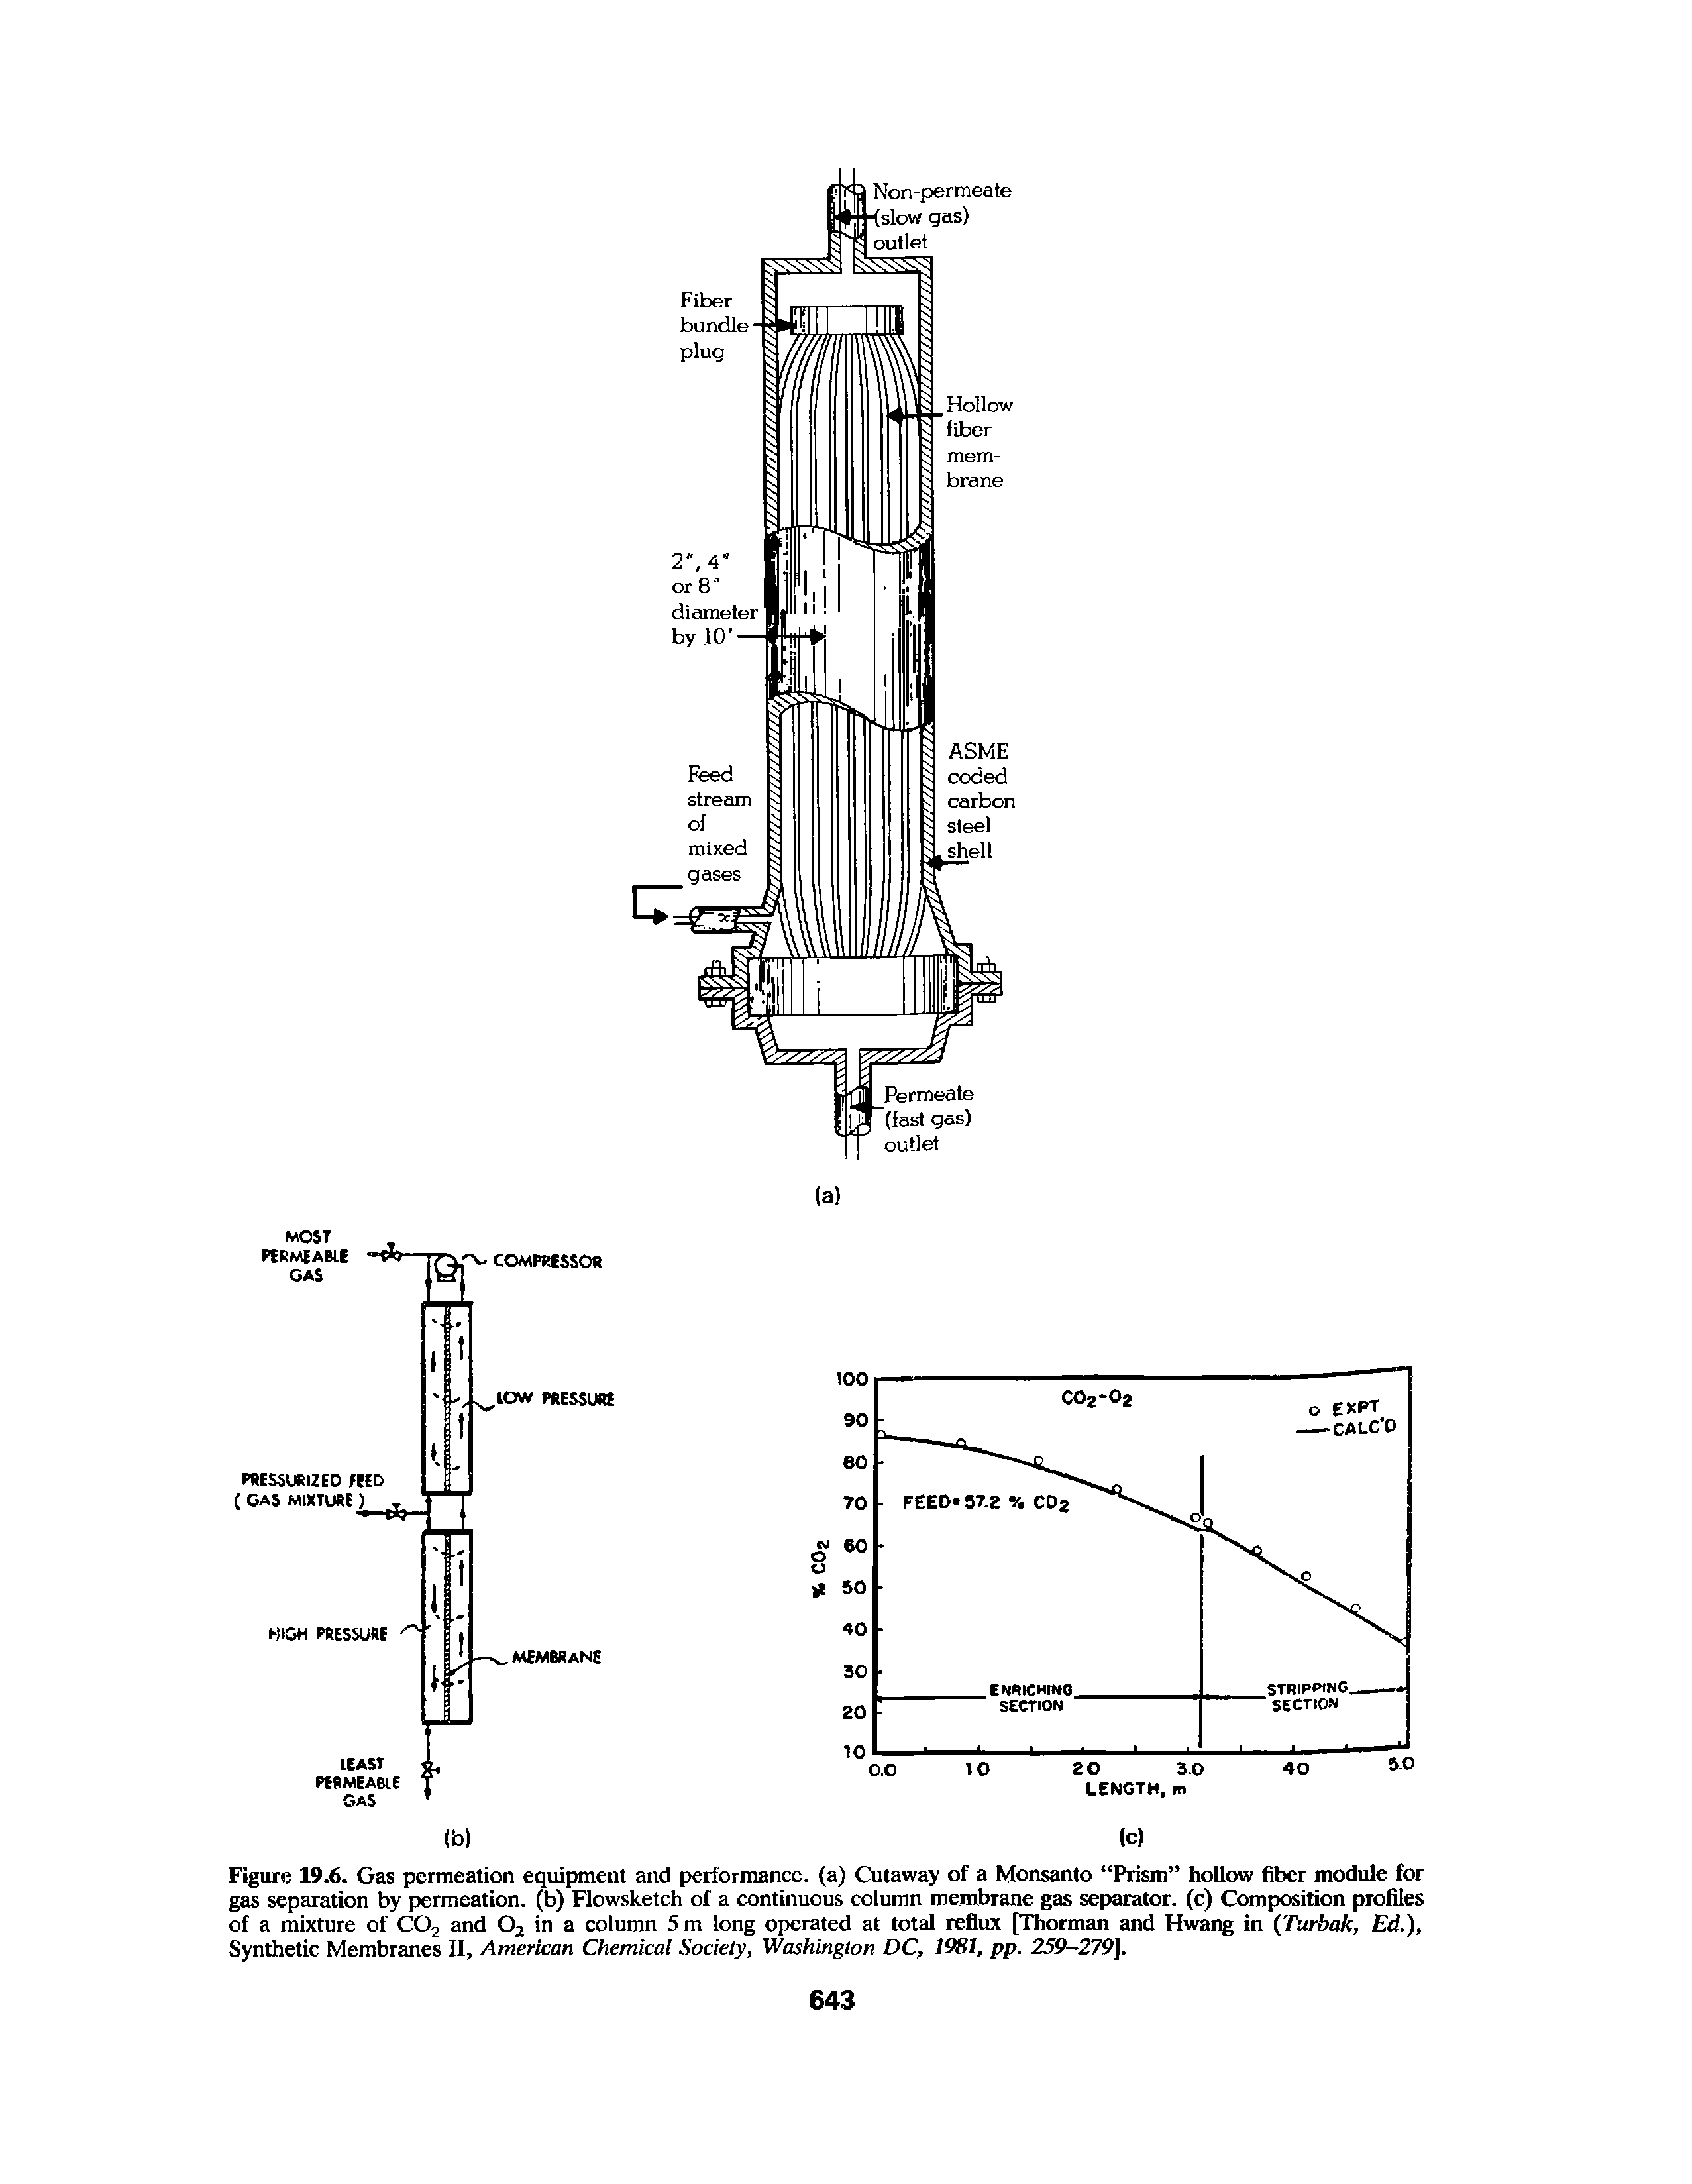 Figure 19.6. Gas permeation equipment and performance, (a) Cutaway of a Monsanto Prism hollow fiber module for gas separation by permeation, (b) Flowsketch of a continuous column membrane gas separator, (c) Composition profiles of a mixture of C02 and Oz in a column 5 m long operated at total reflux [Thorman and Hwang in ( Turbak, Ed.), Synthetic Membranes II, American Chemical Society, Washington DC, 1981, pp. 259-279],...